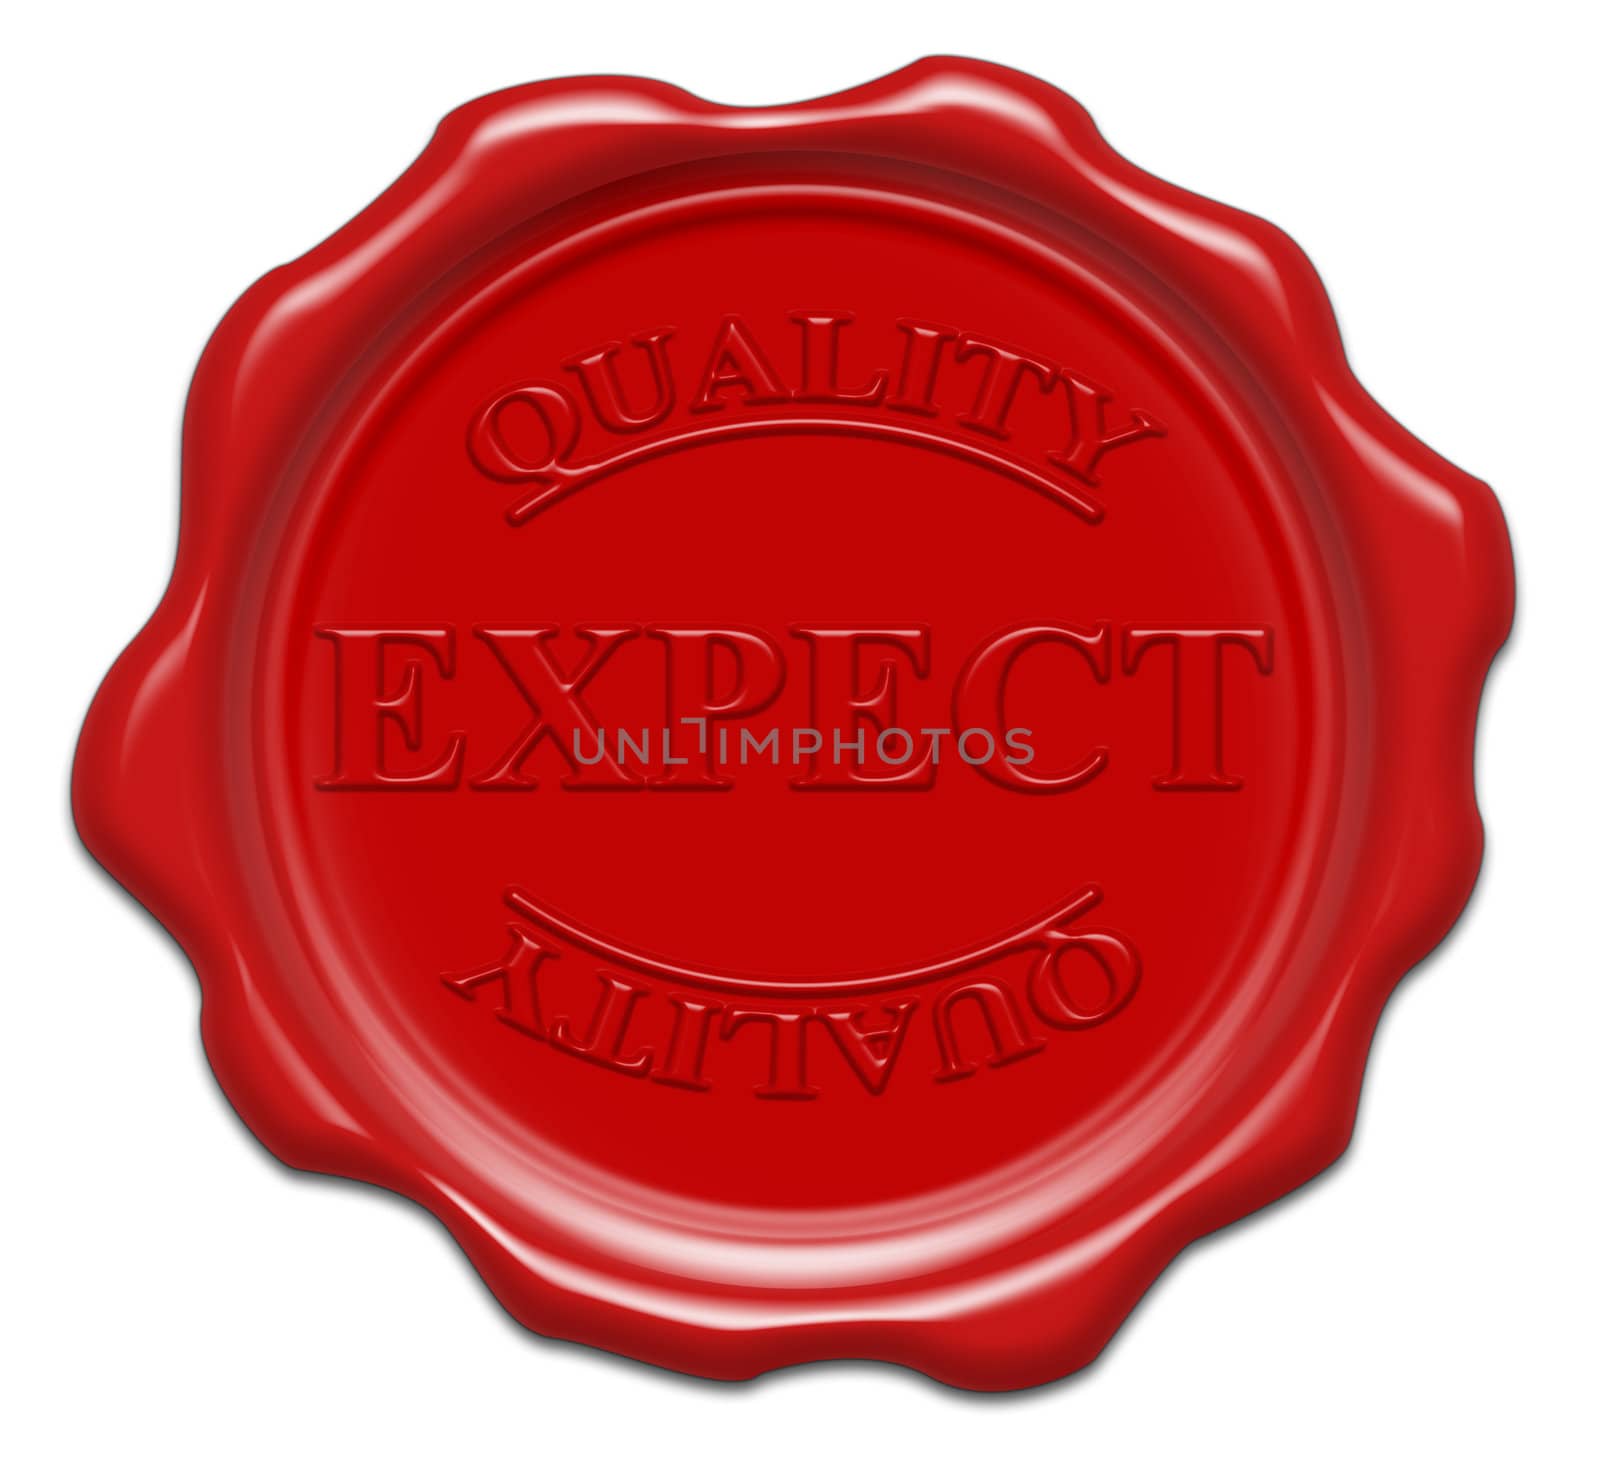 expect quality - illustration red wax seal isolated on white bac by mozzyb